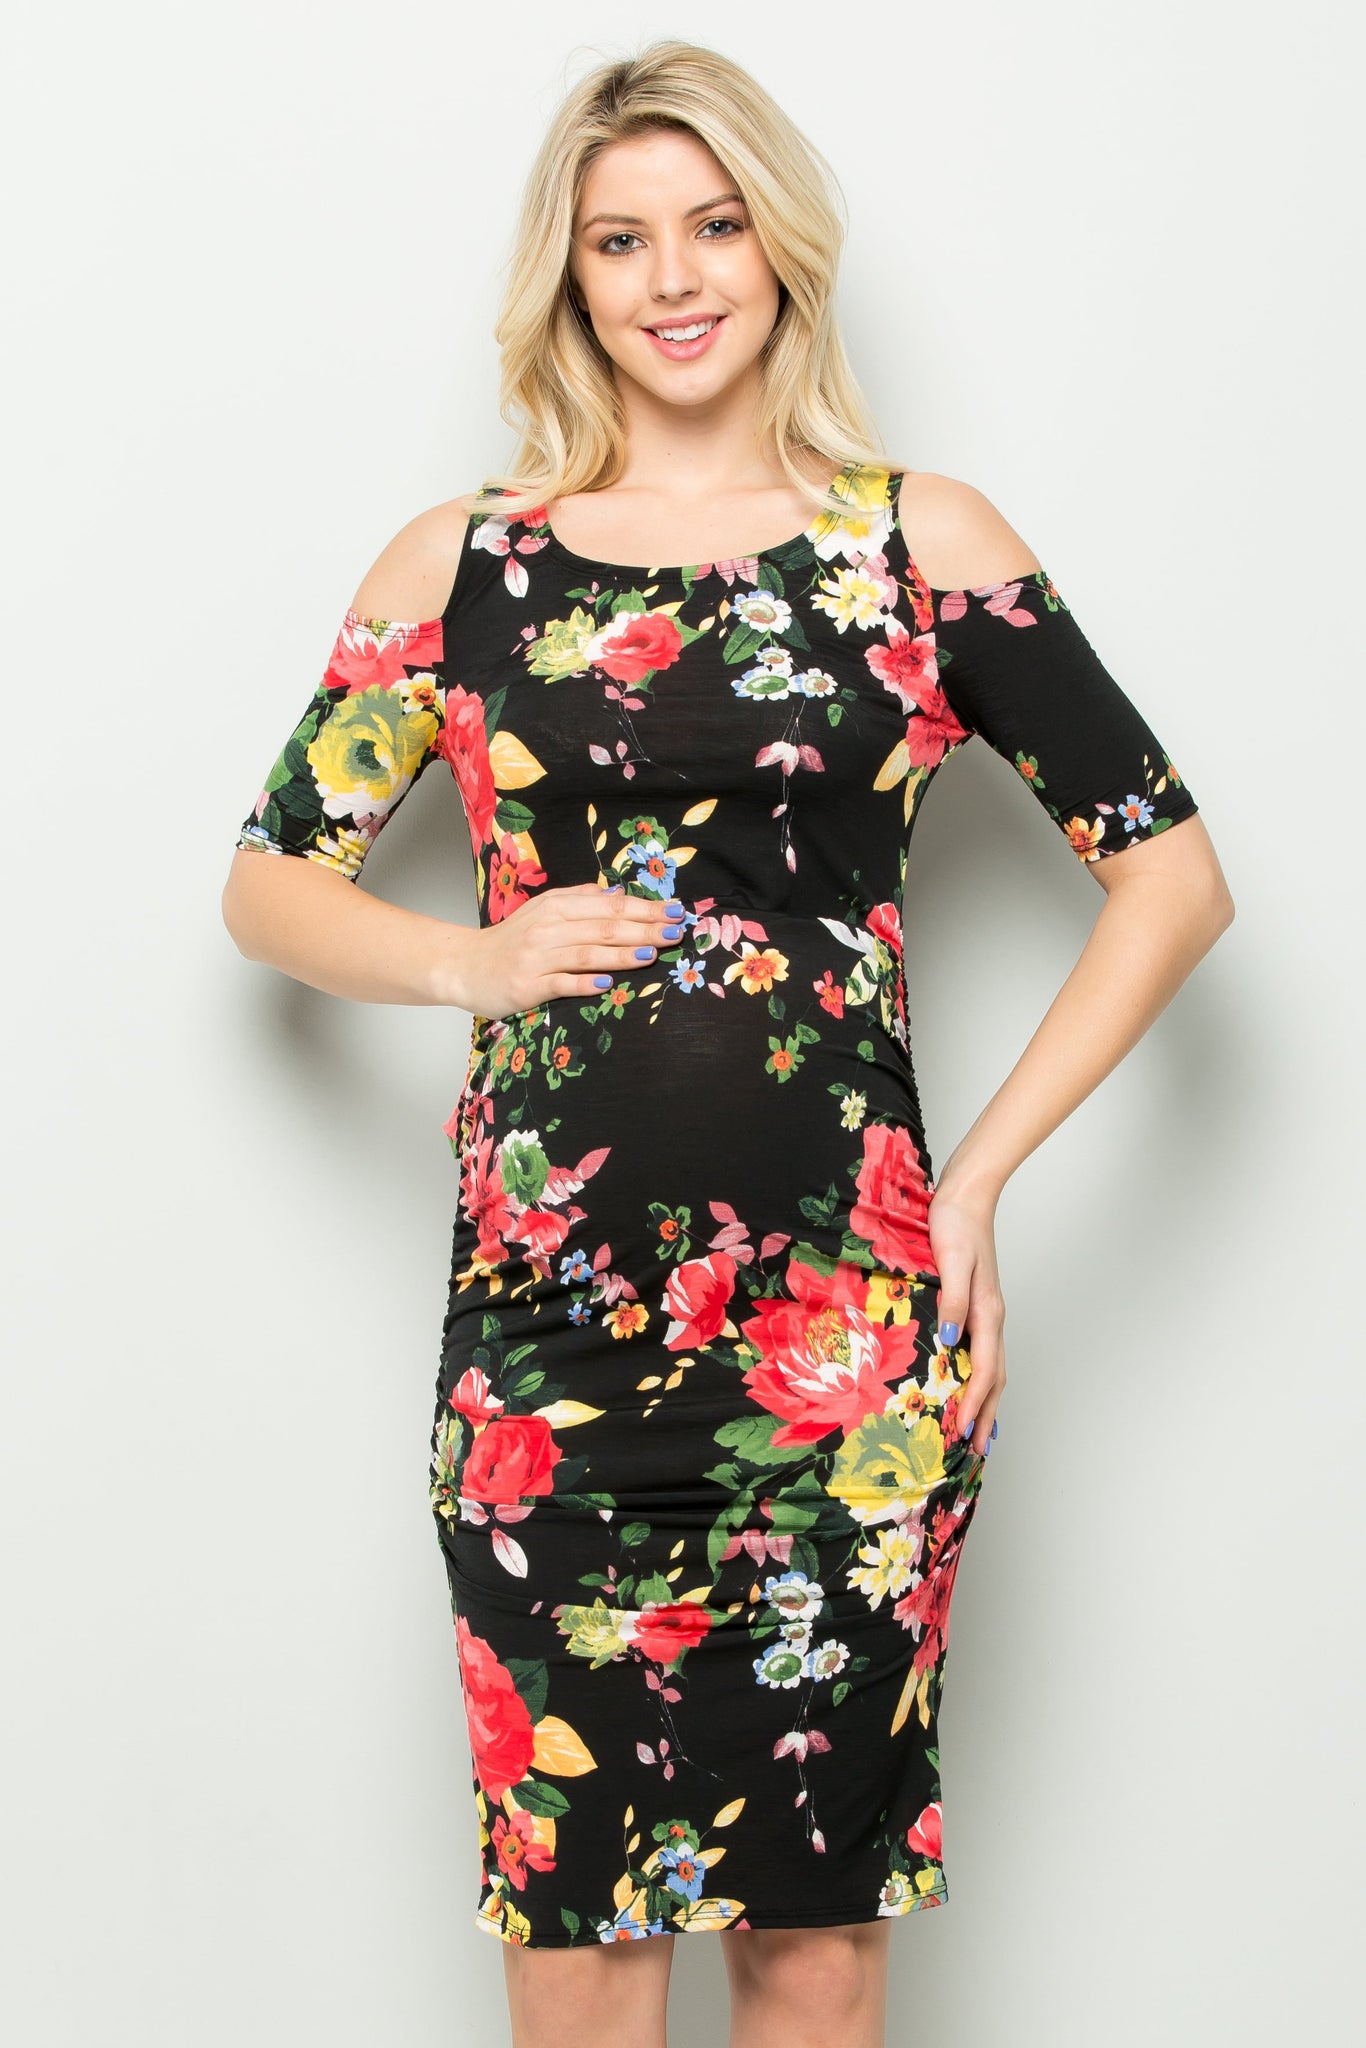 maternity pregnancy baby shower floral cold shoulder short sleeve round scoope neck knee summer cocktail bodycon dress